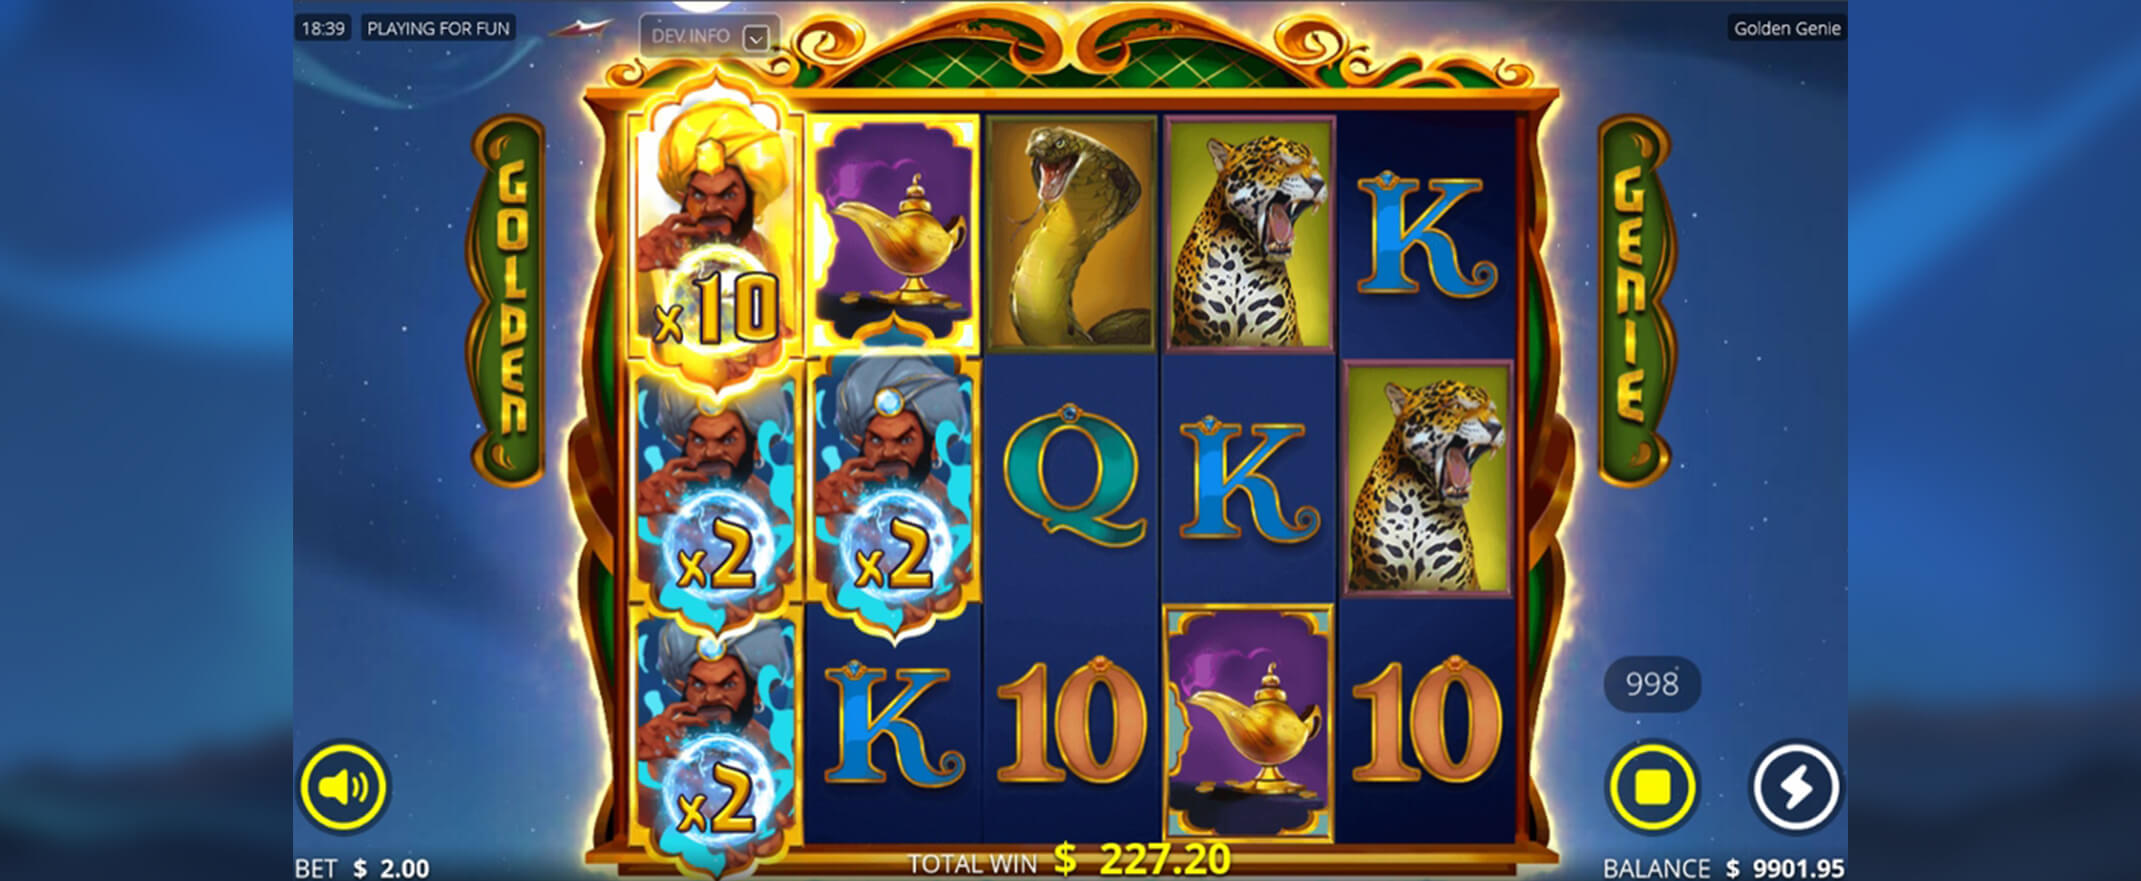 Golden Genie and the Walking Wilds slot review screenshot